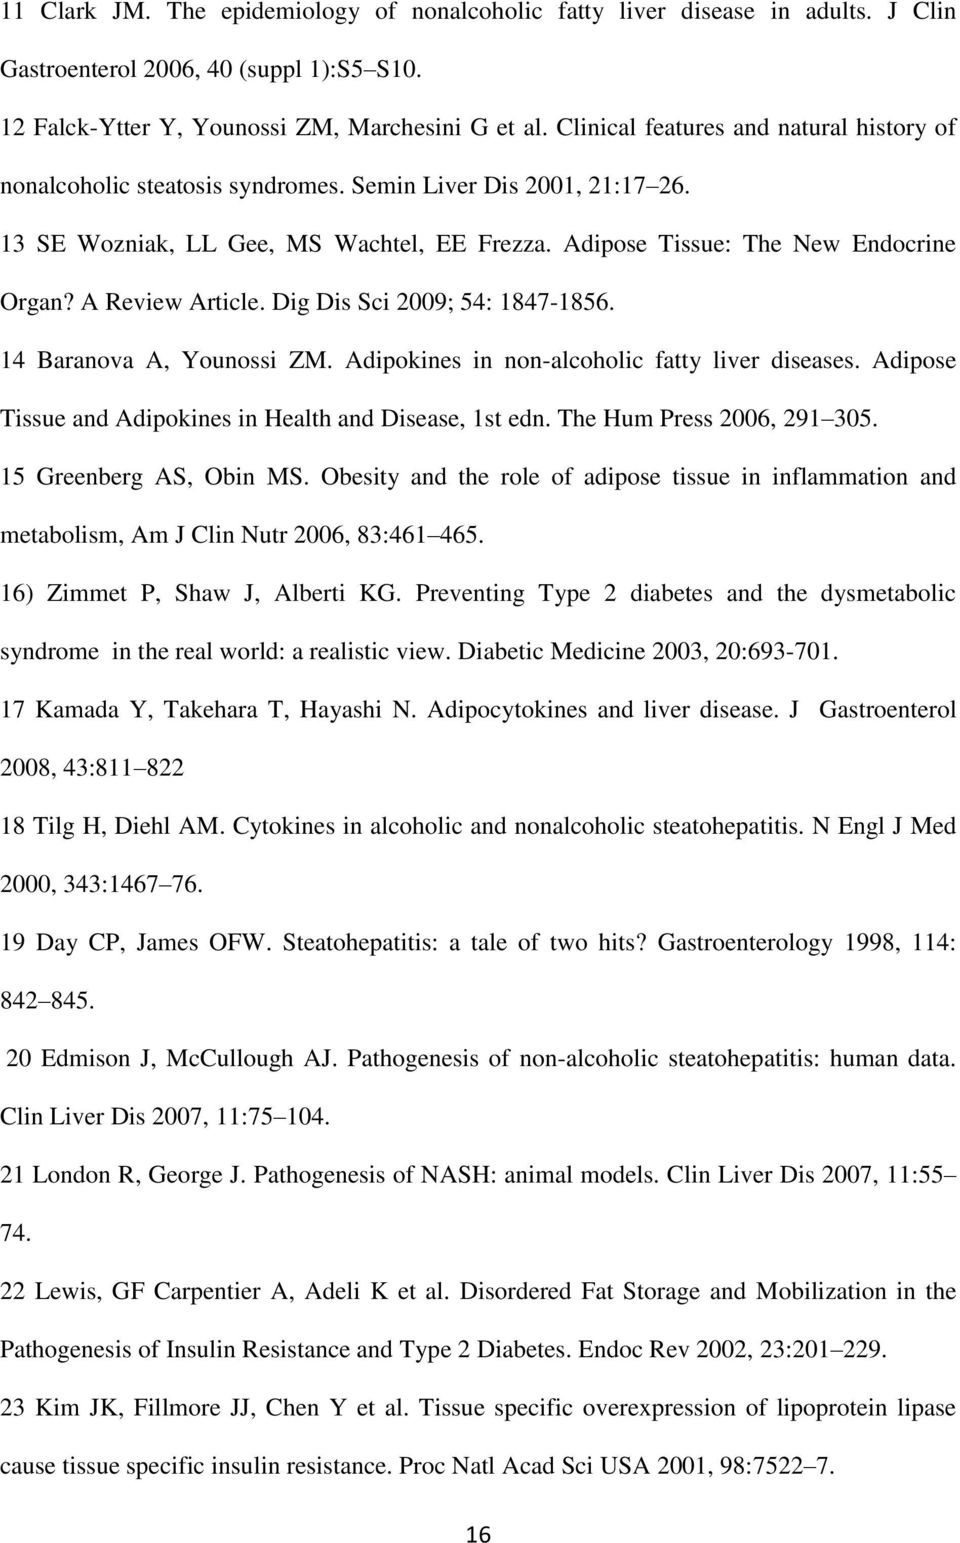 A Review Article. Dig Dis Sci 2009; 54: 1847-1856. 14 Baranova A, Younossi ZM. Adipokines in non-alcoholic fatty liver diseases. Adipose Tissue and Adipokines in Health and Disease, 1st edn.